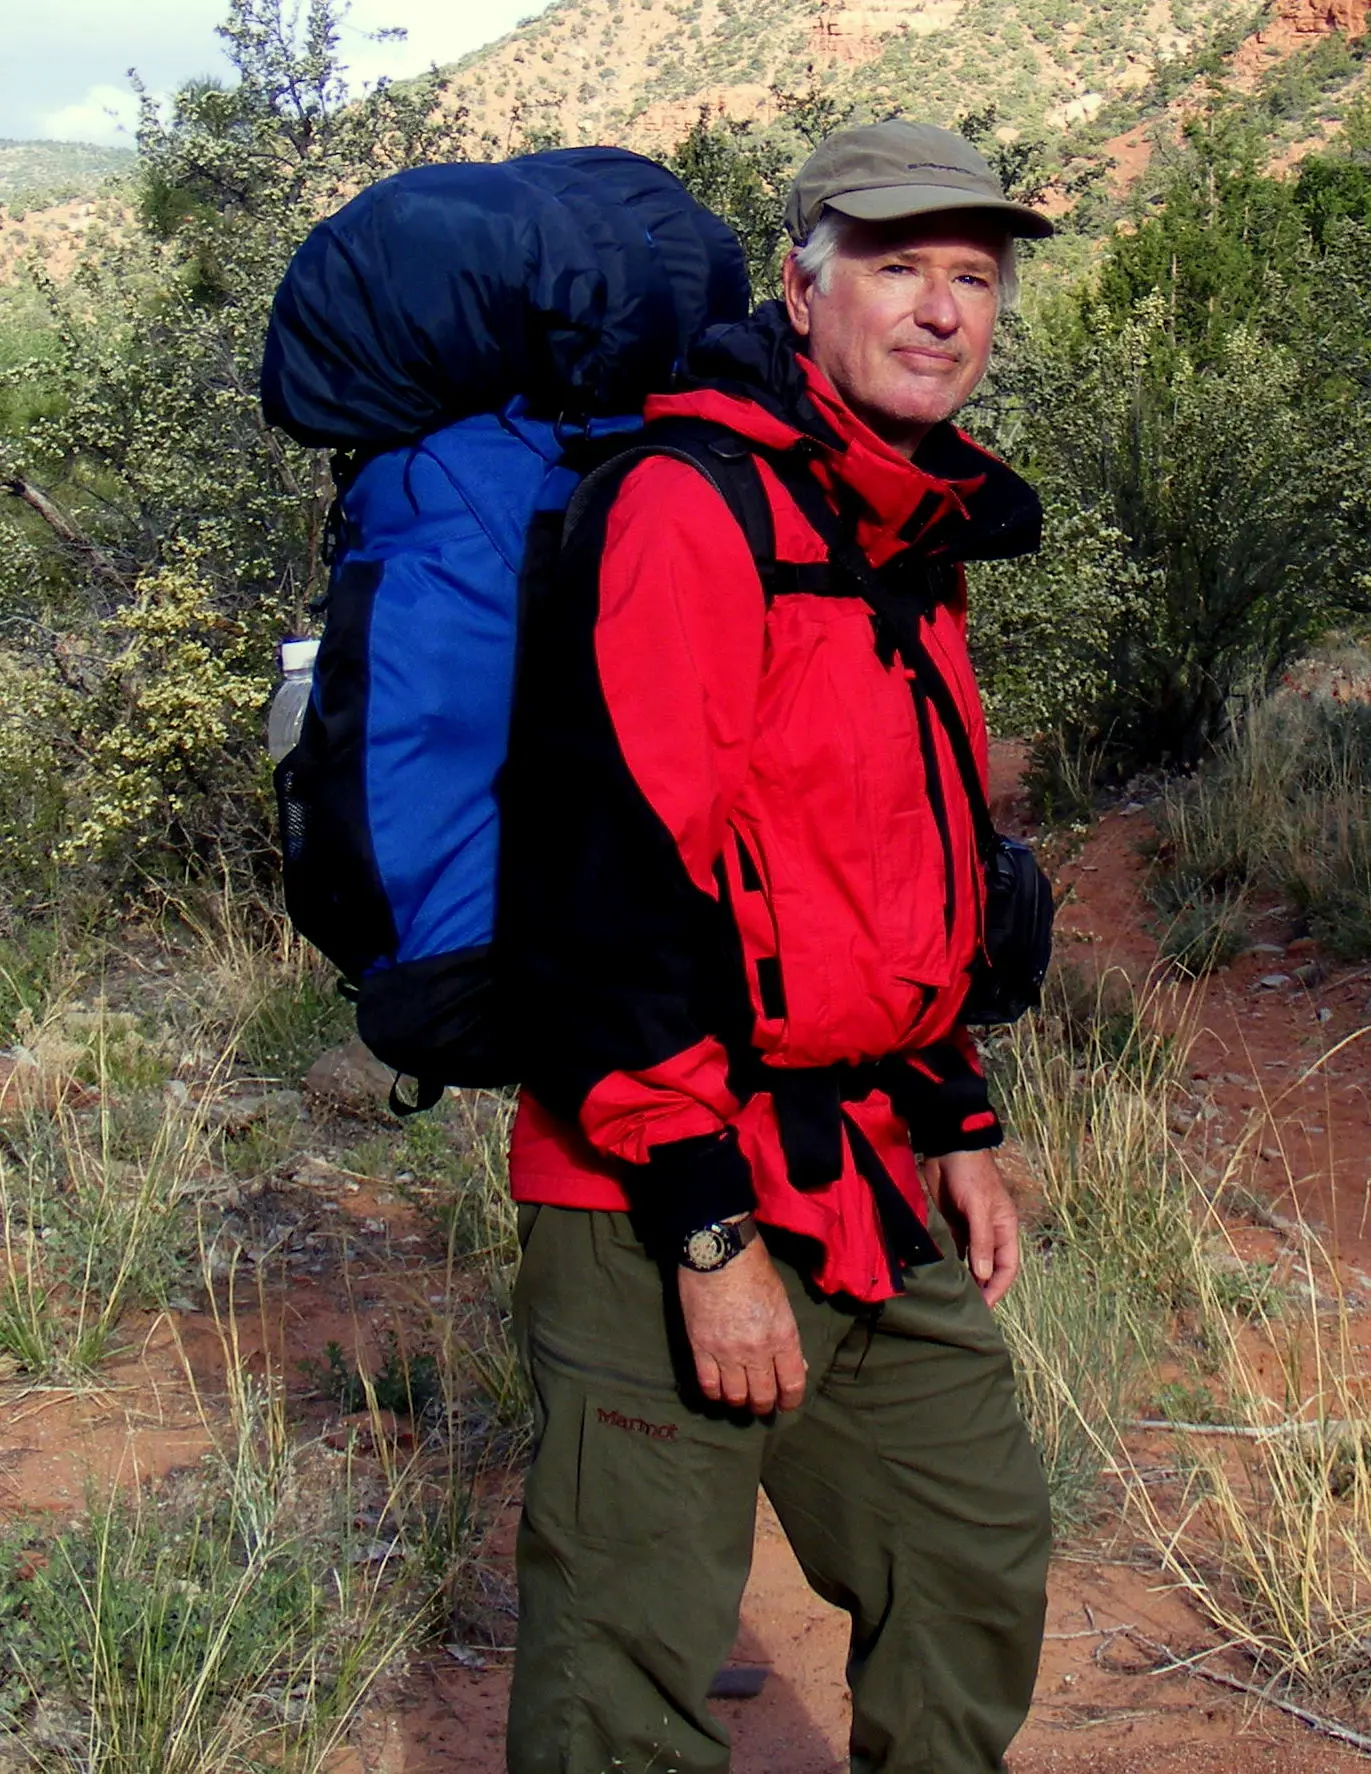 Allen backpacking in Zion National Park in the Western U.S.